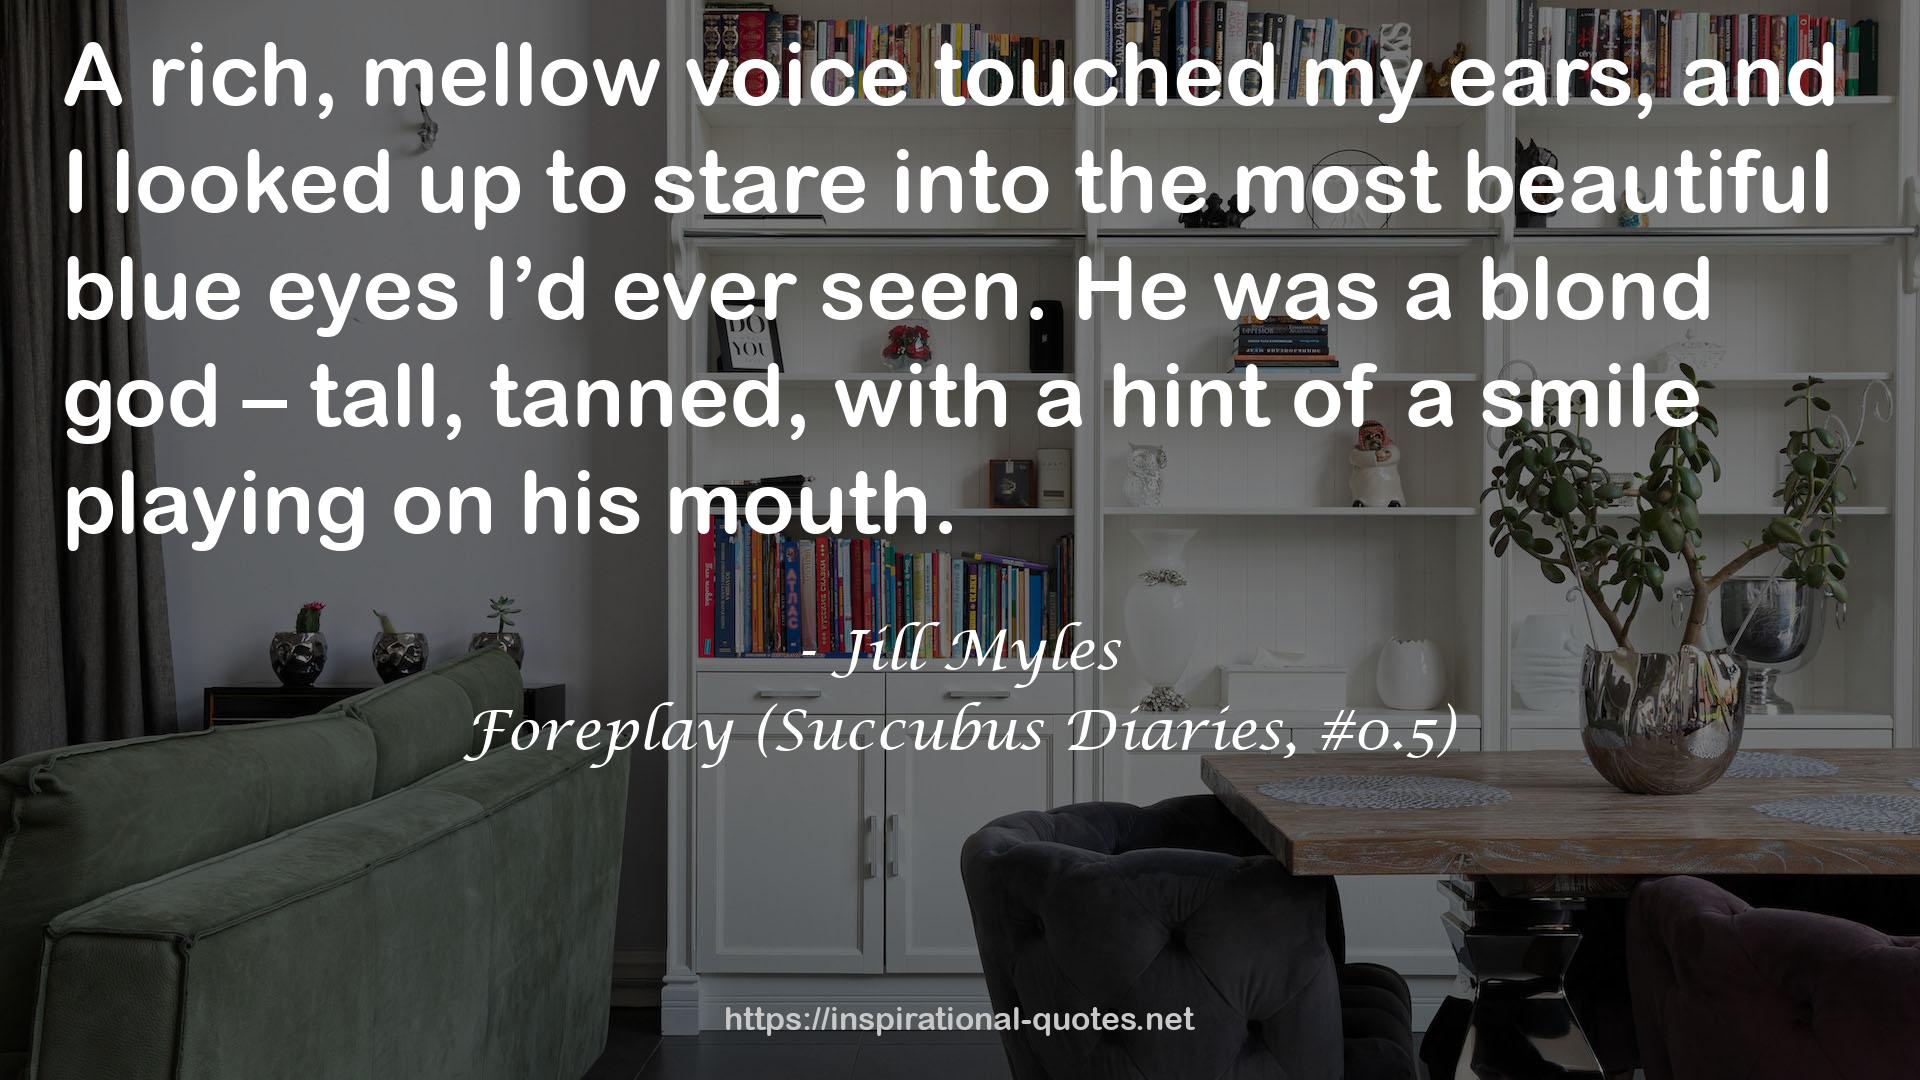 Foreplay (Succubus Diaries, #0.5) QUOTES